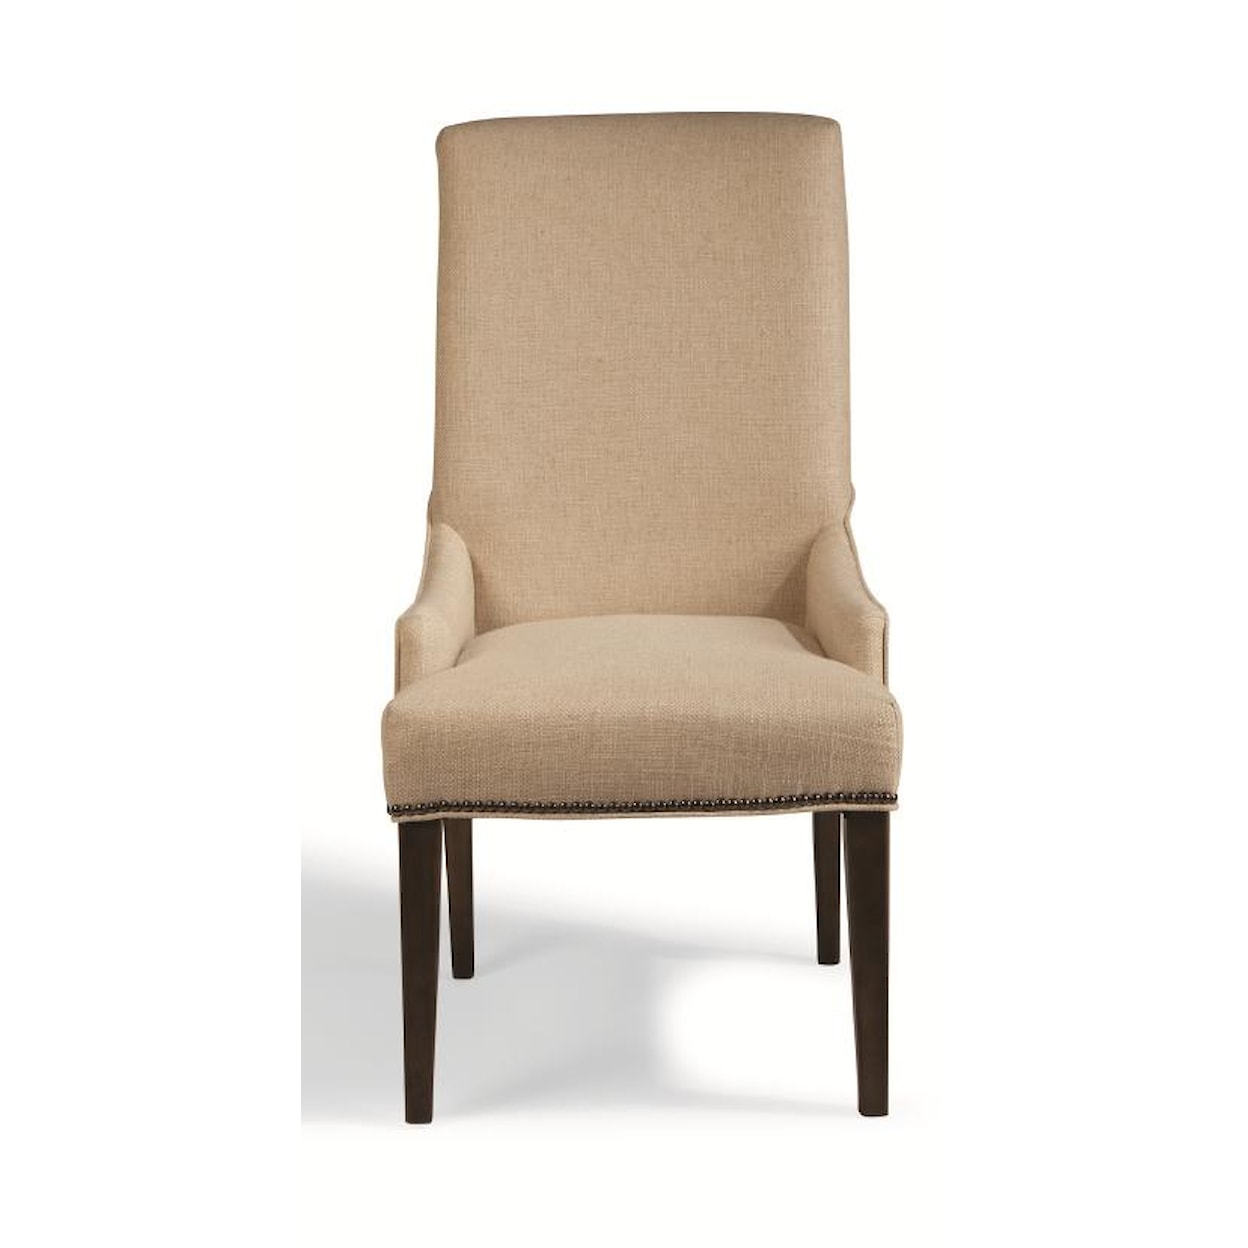 Magnussen Home  Rothman Upholstered Chair